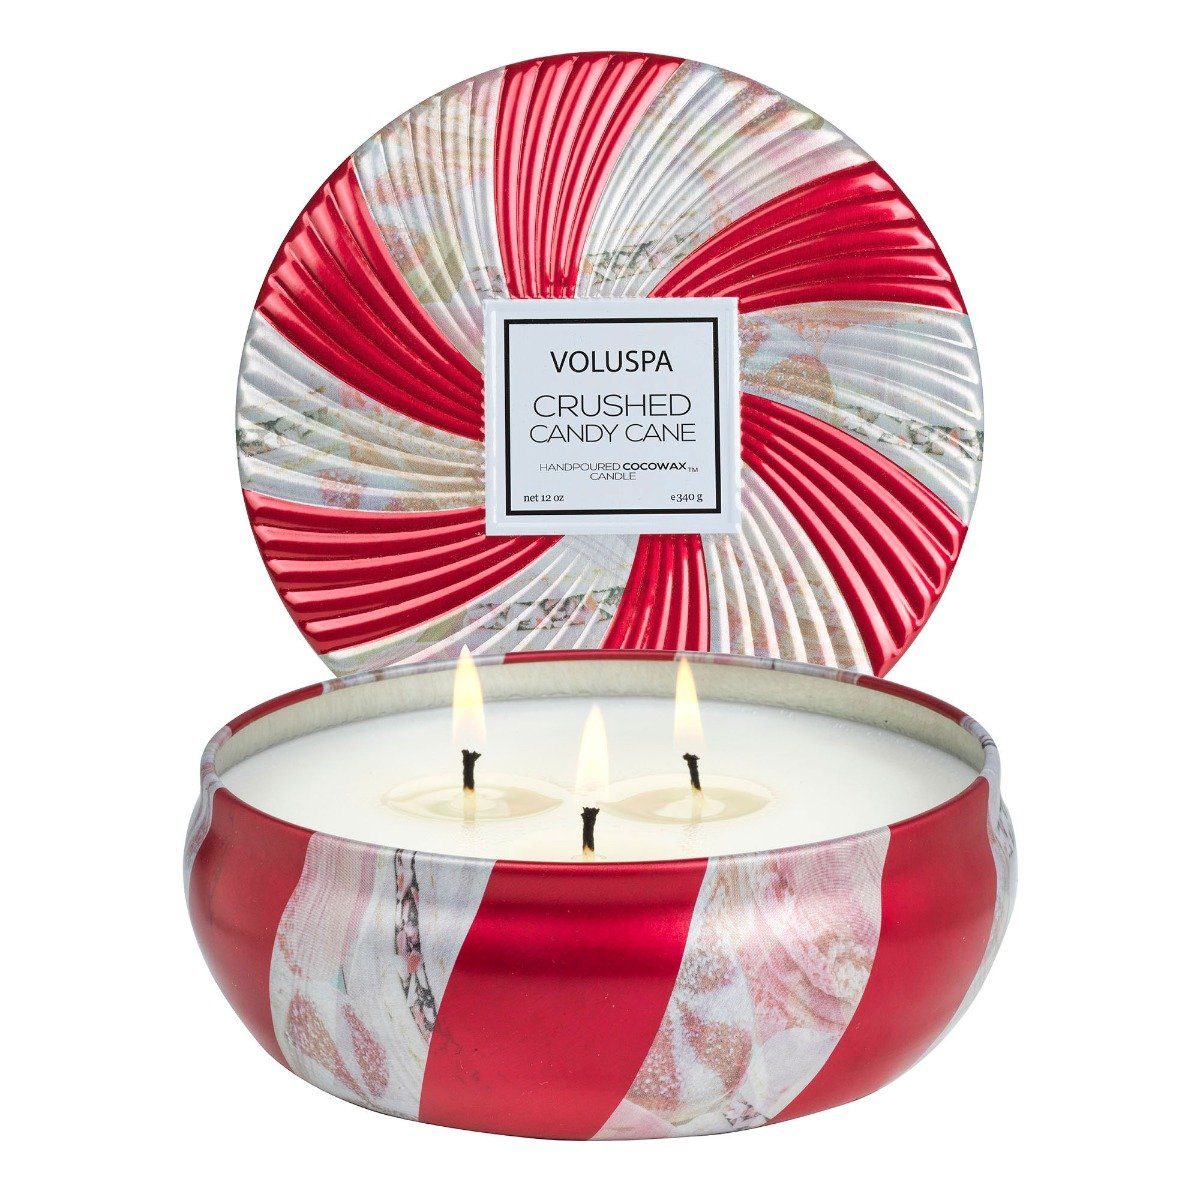 Crushed Candy Cane 3 Wick Tin Candle